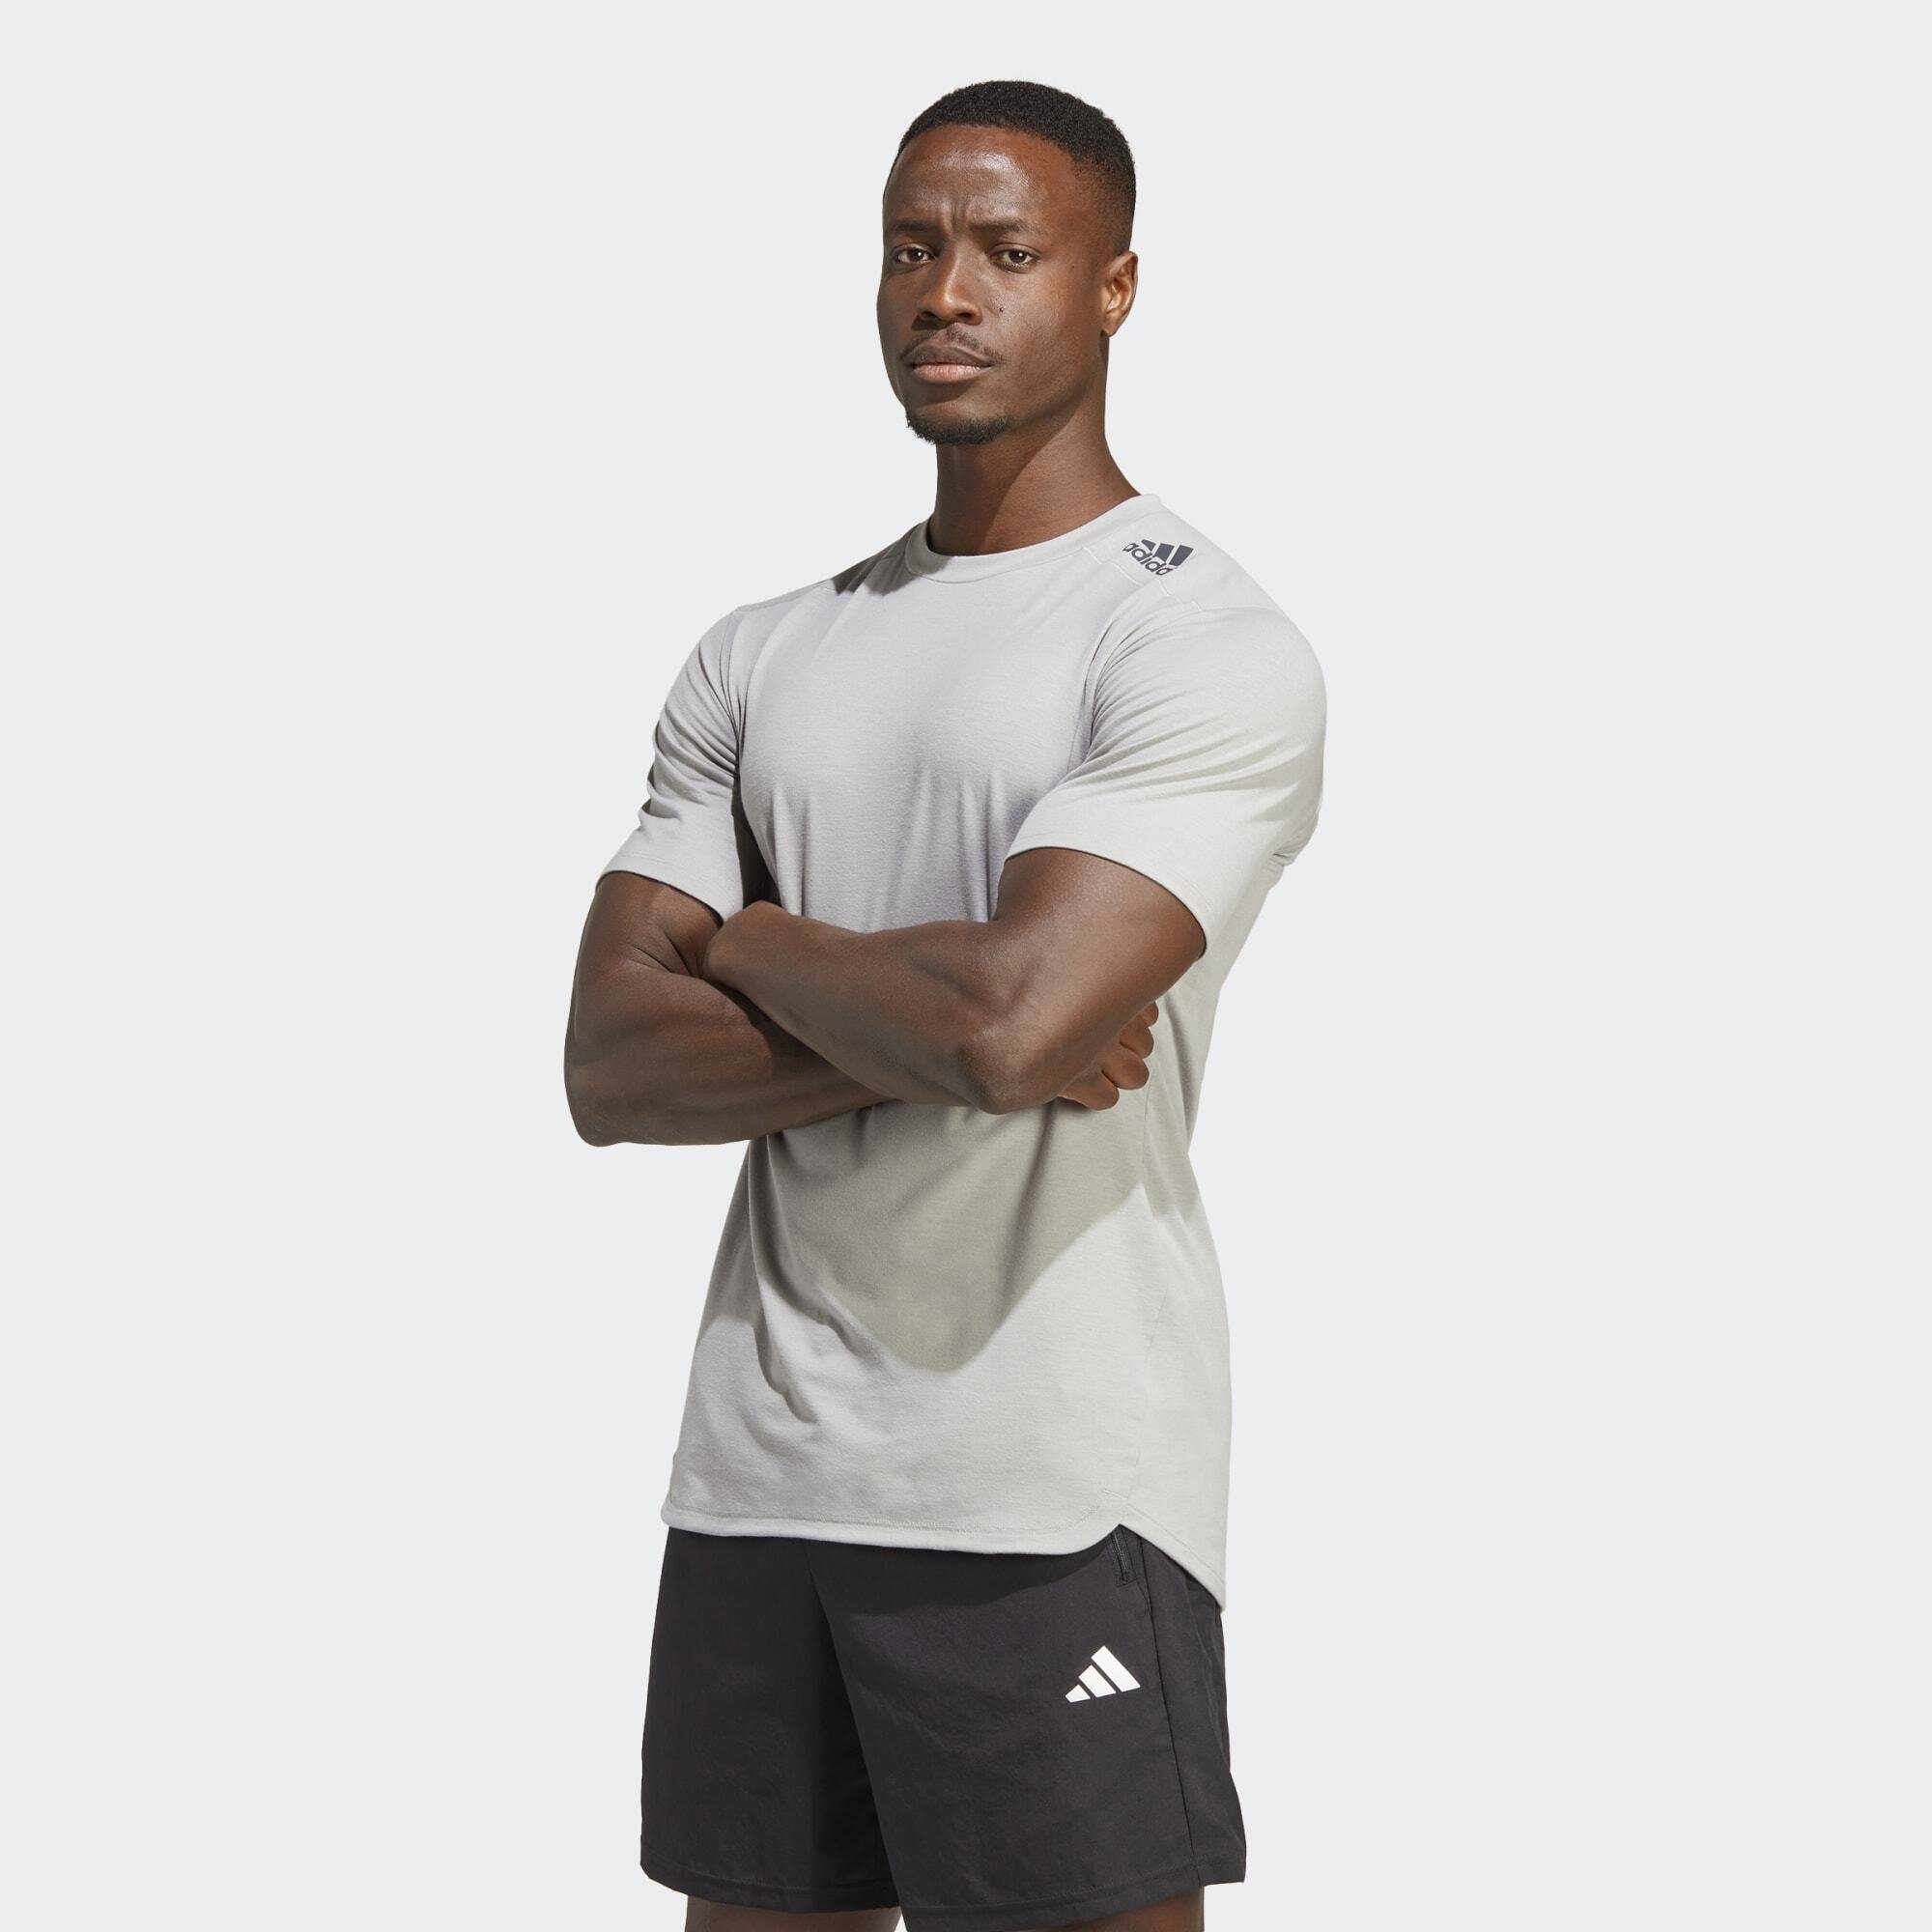 Mgh Solid Grey adidas Performance T-SHIRT Funktionsshirt FOR TRAINING DESIGNED